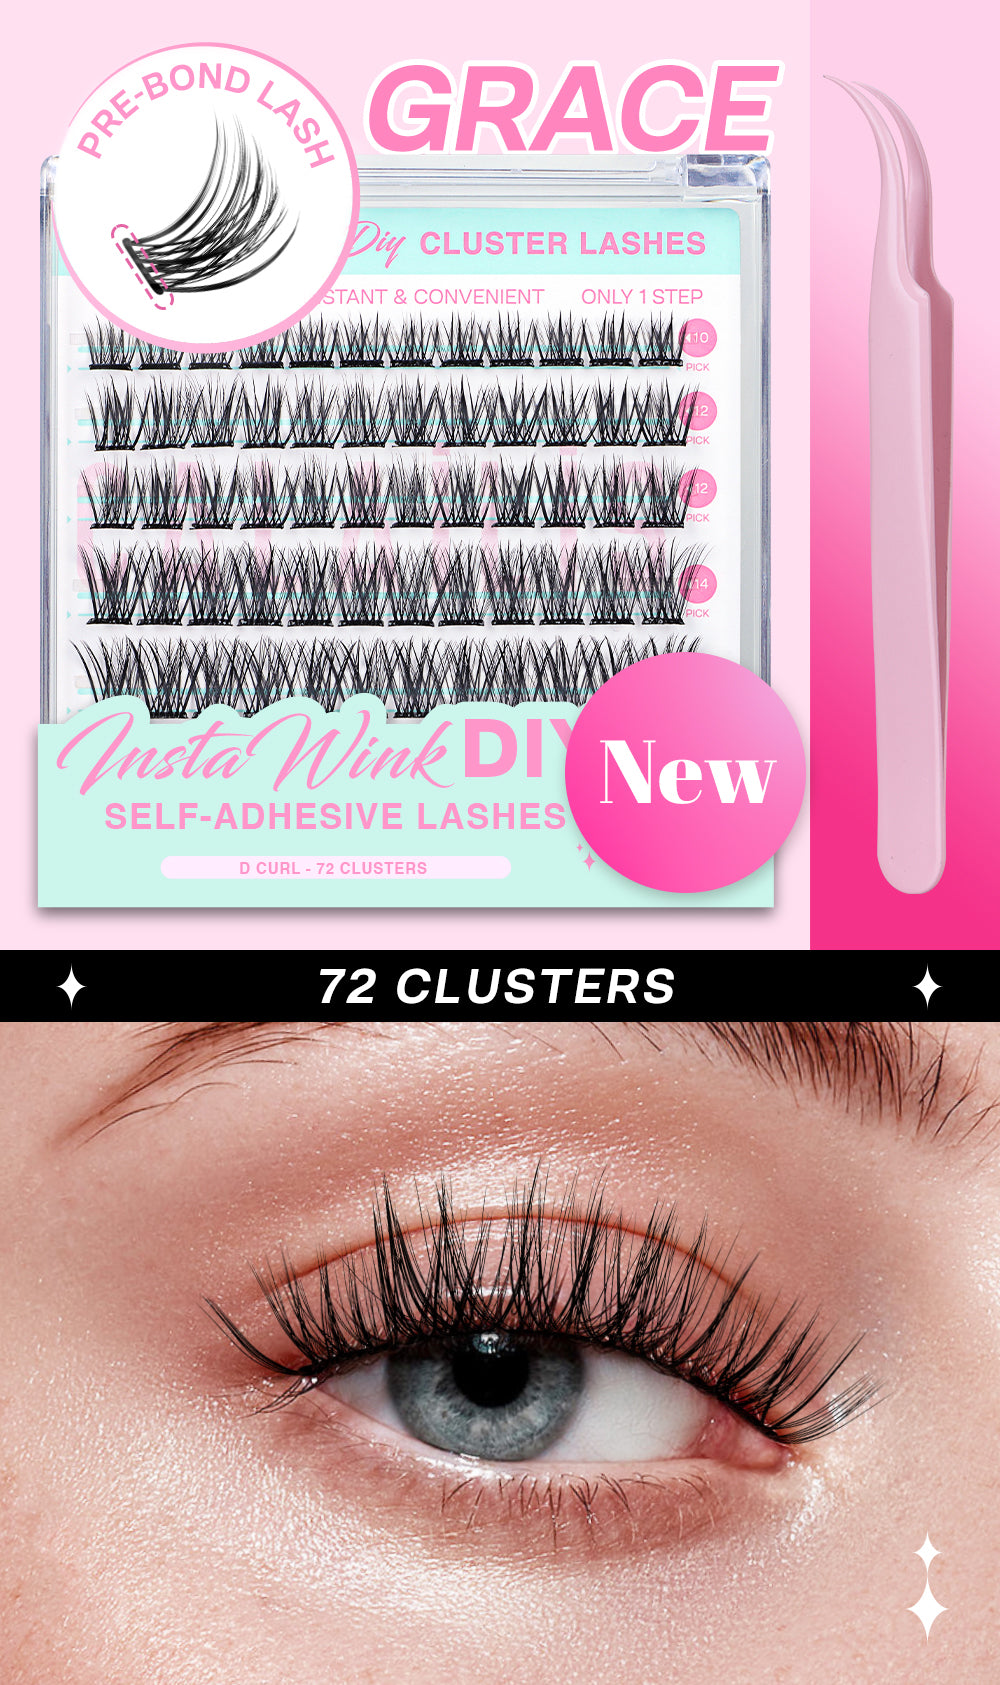 GRACE Self-adhesive Cluster Lashes